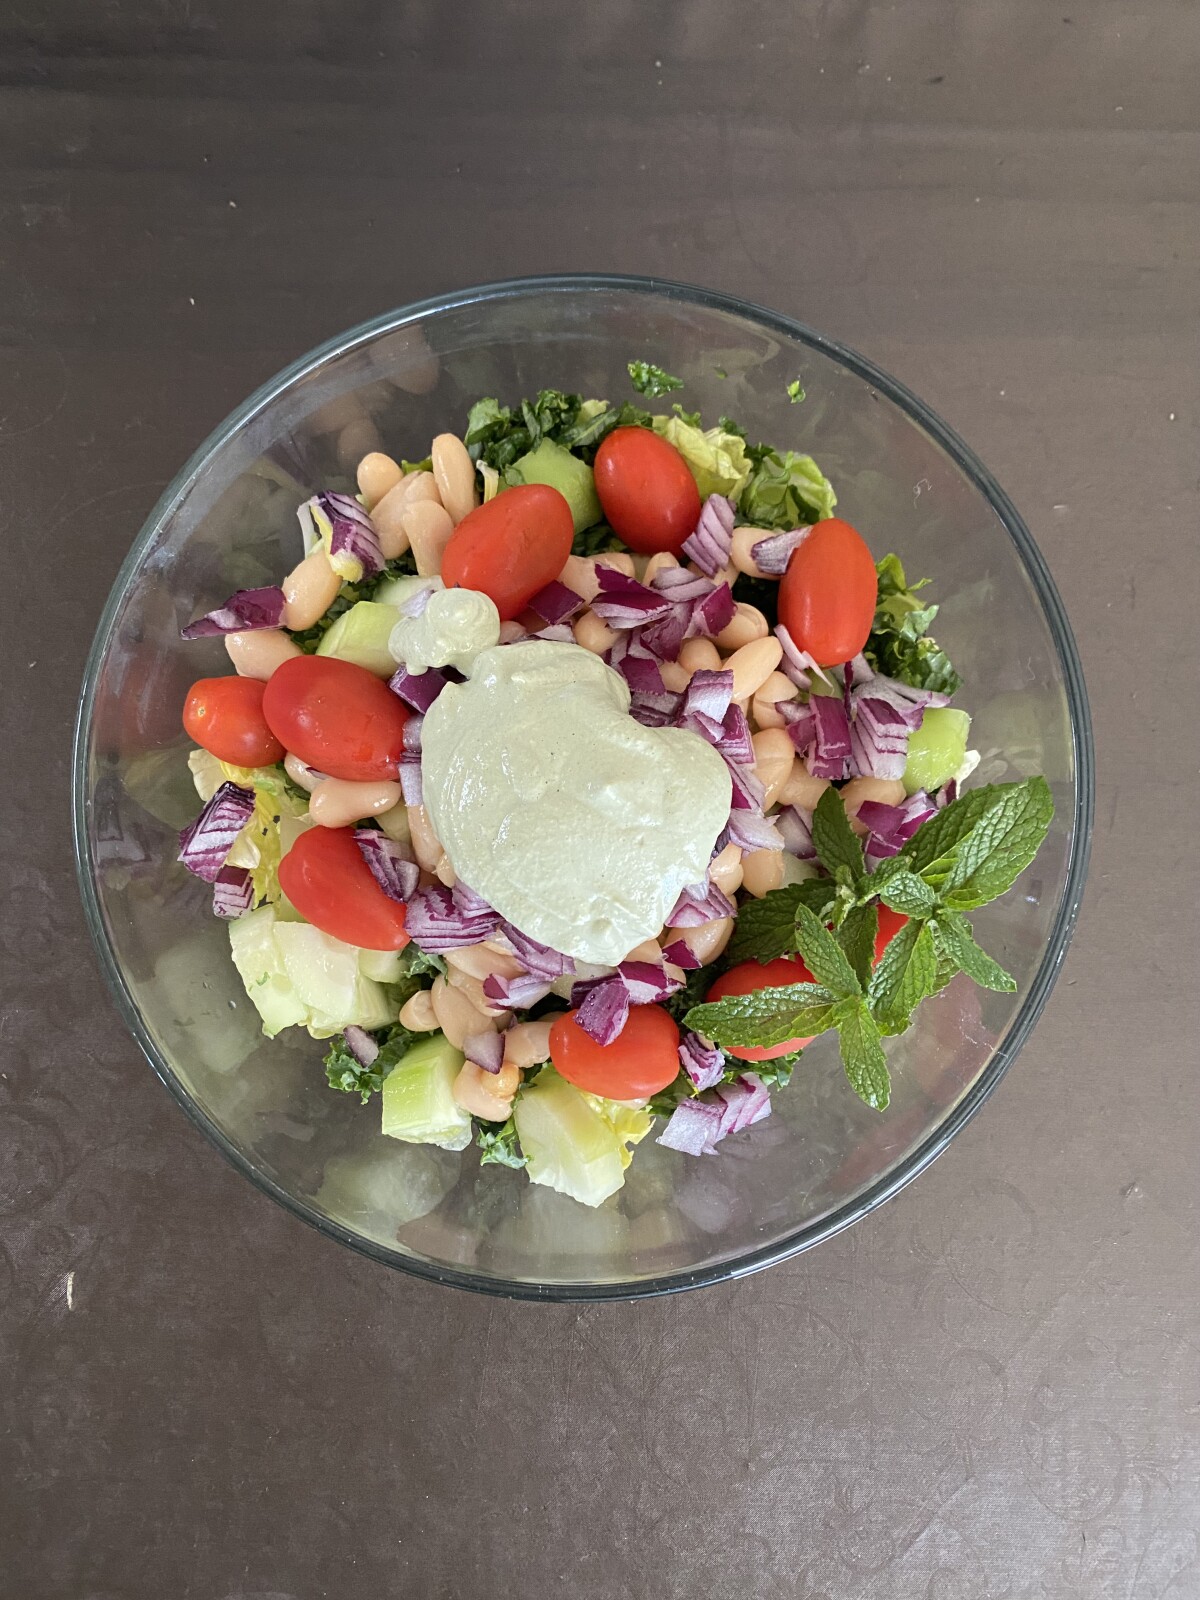 Dress Up Your Salads with Pepita (Pumpkin Seed) Dressing